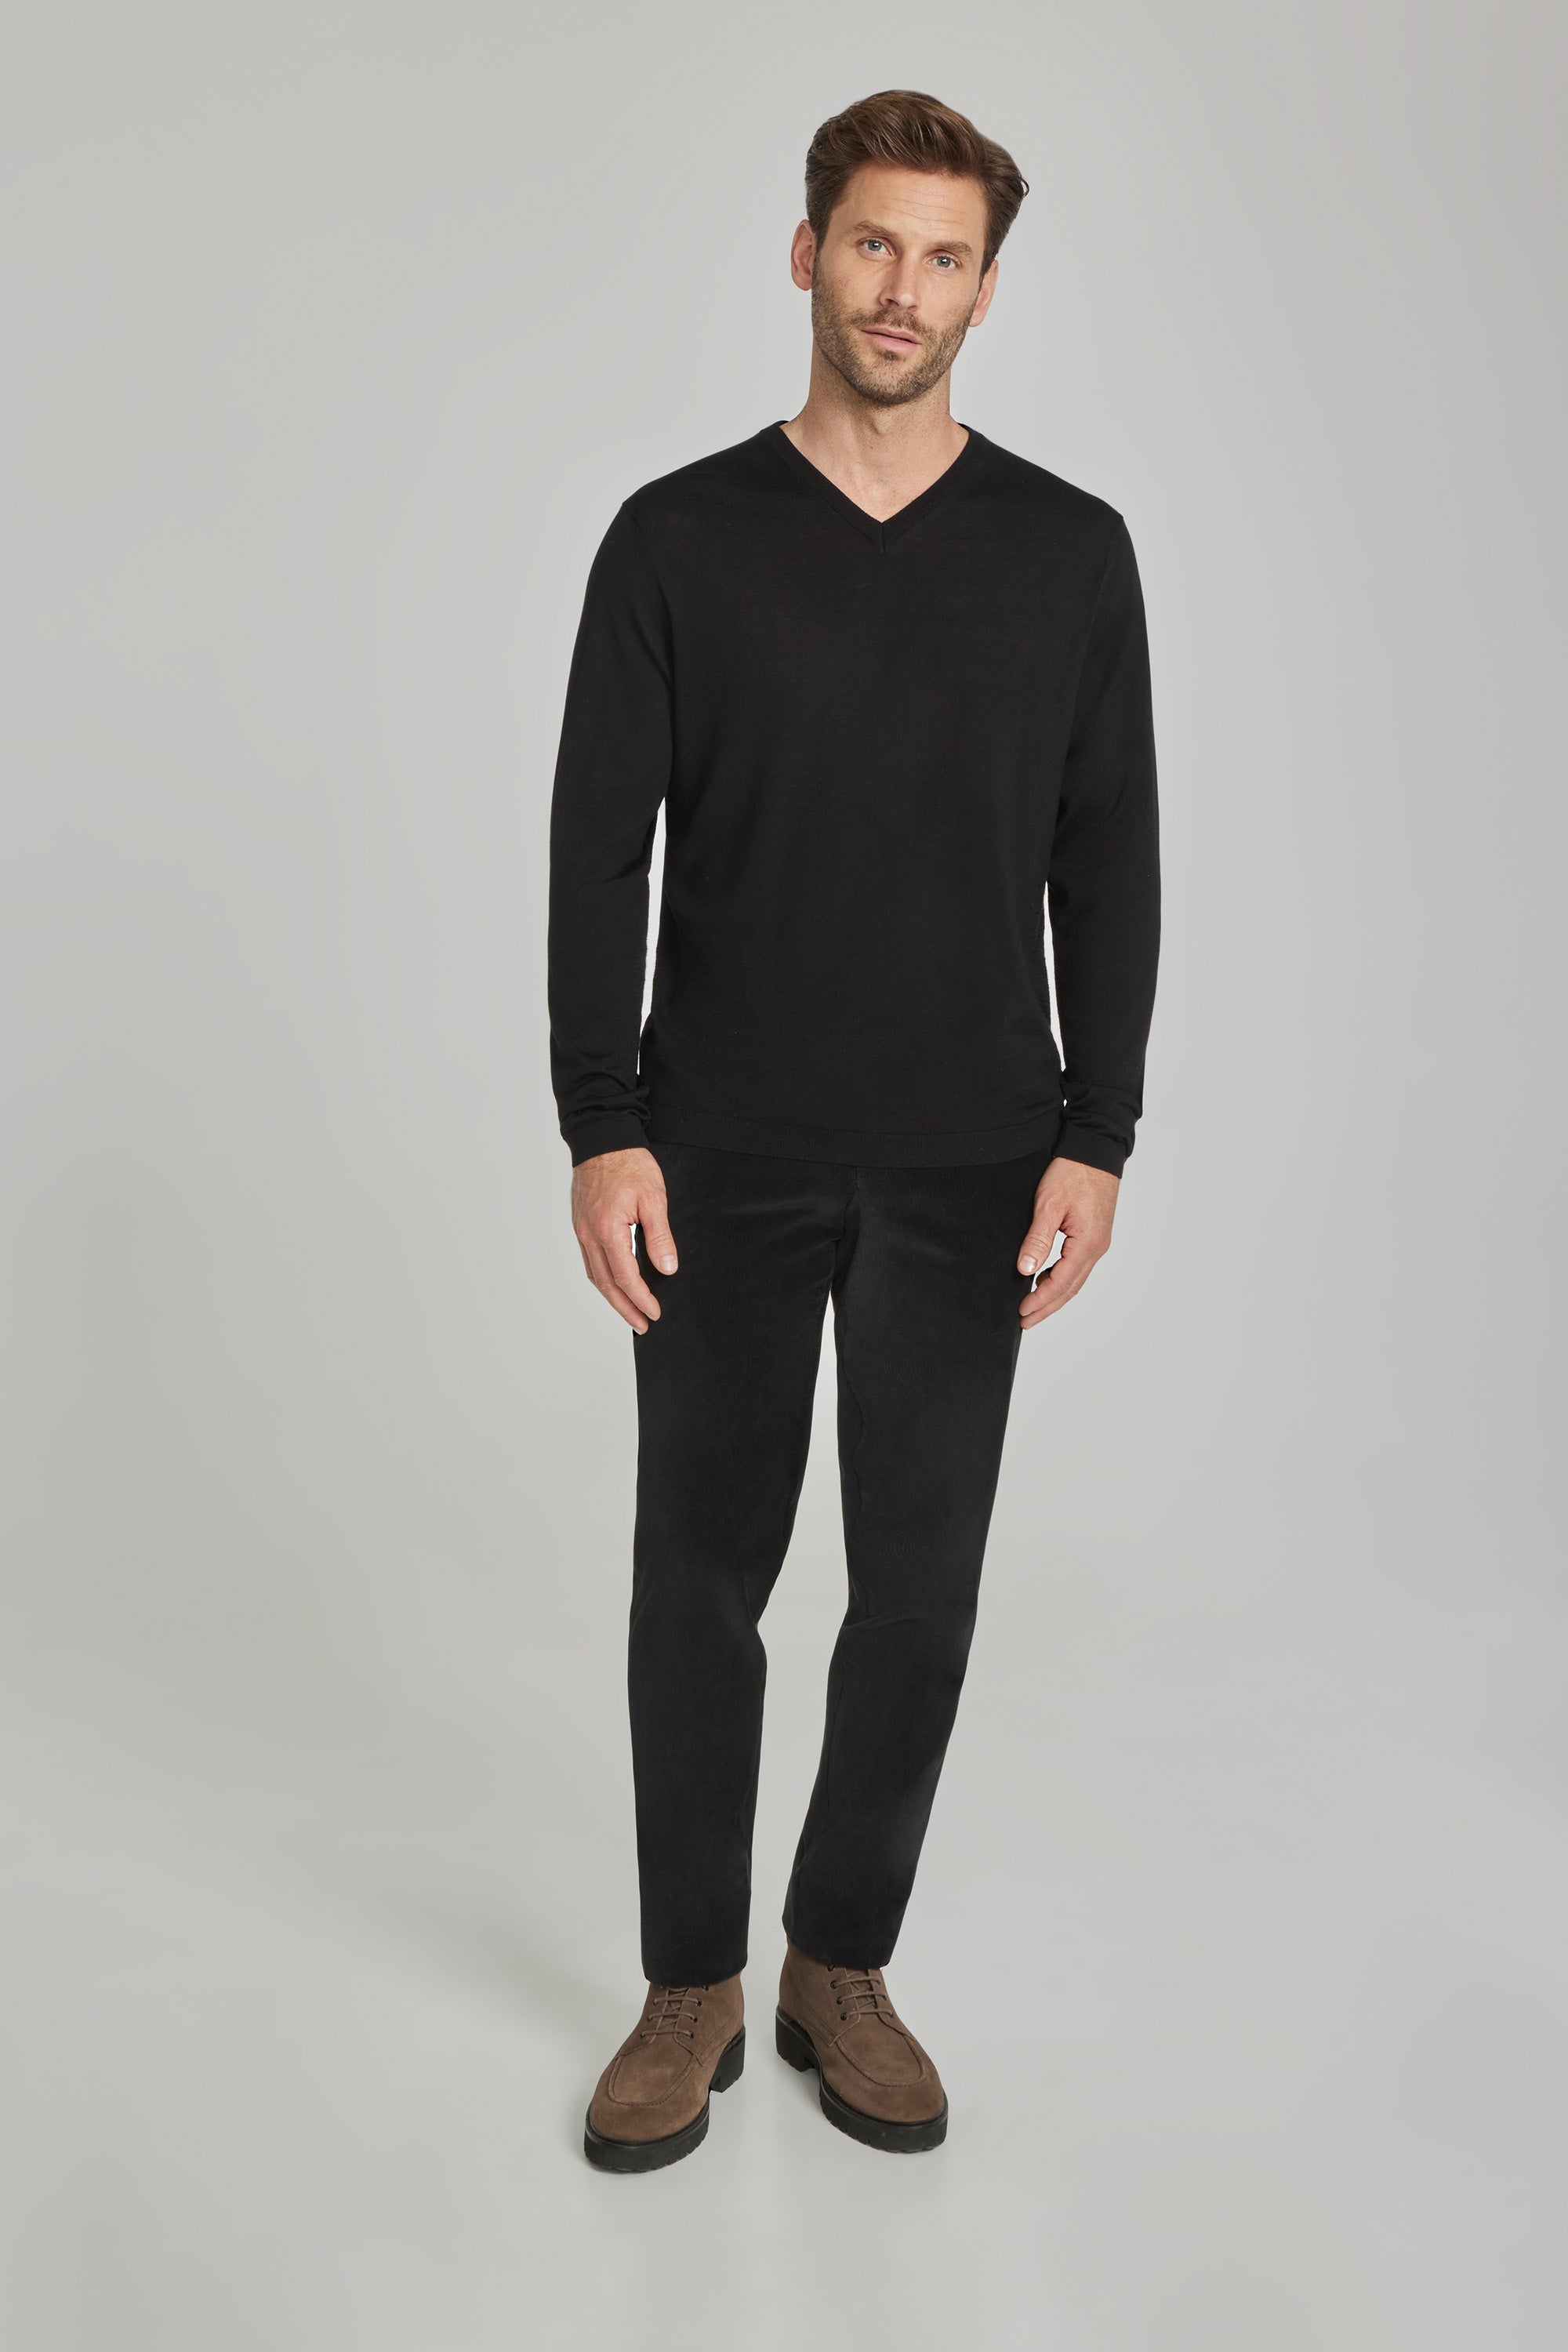 Alt view 3 Ramezay Wool, Silk and Cashmere V-Neck Sweater in Black